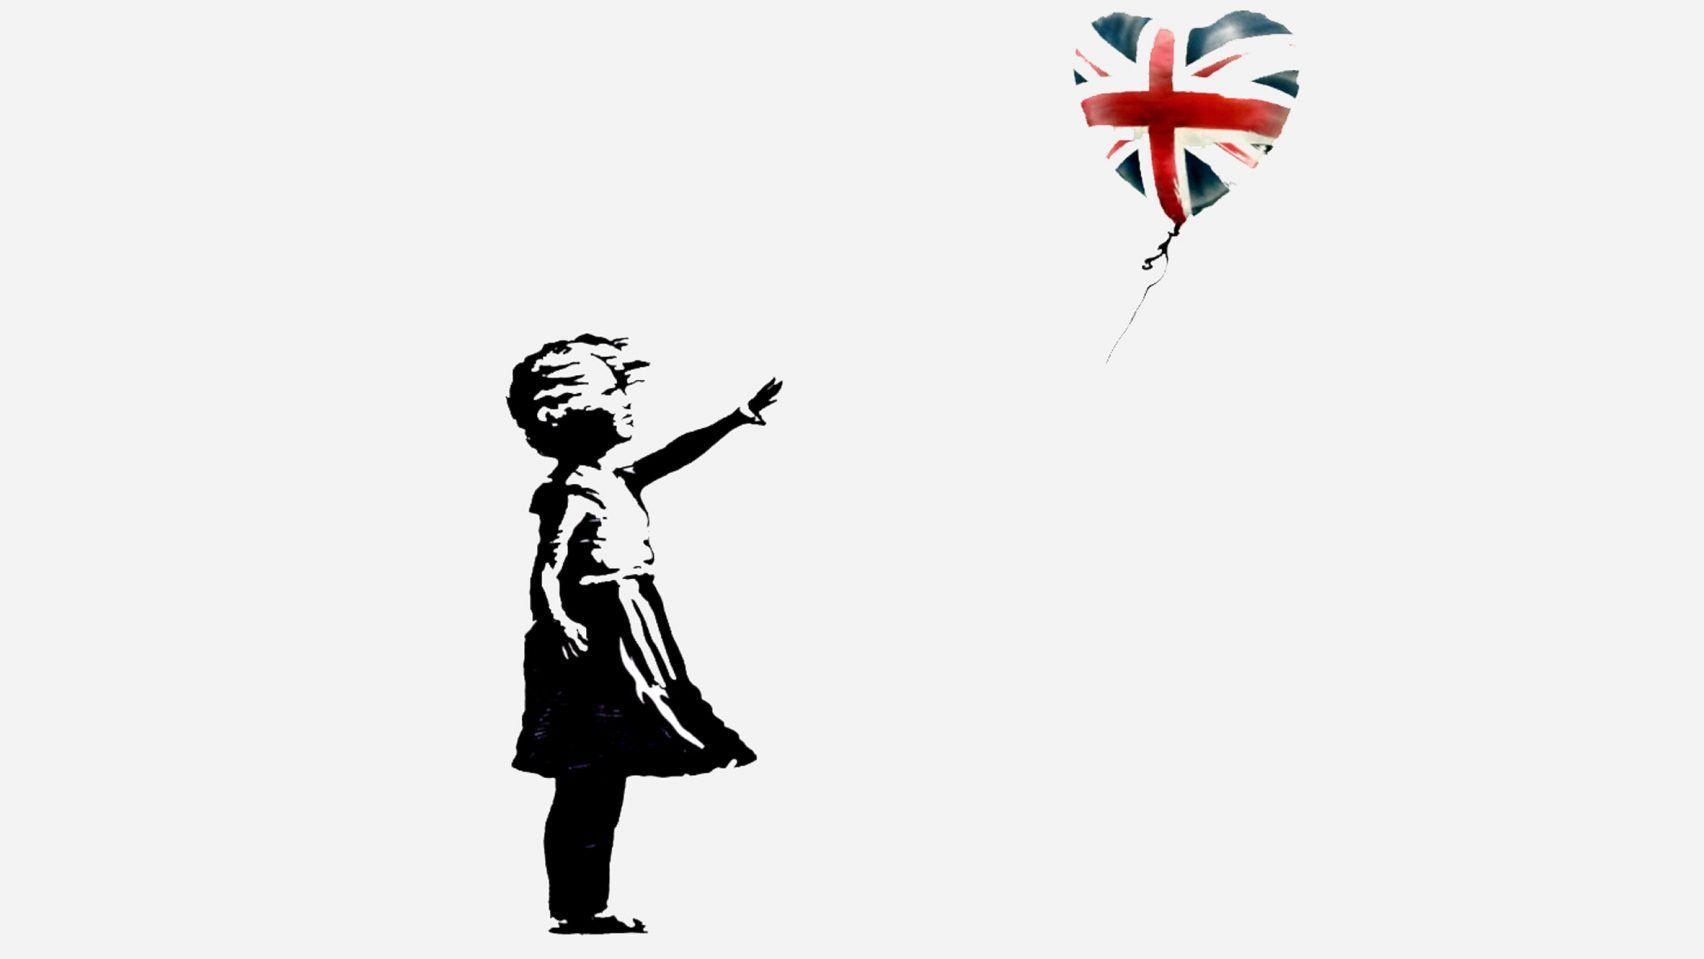 Banksy to send free print to UK voters opposing the Conservatives